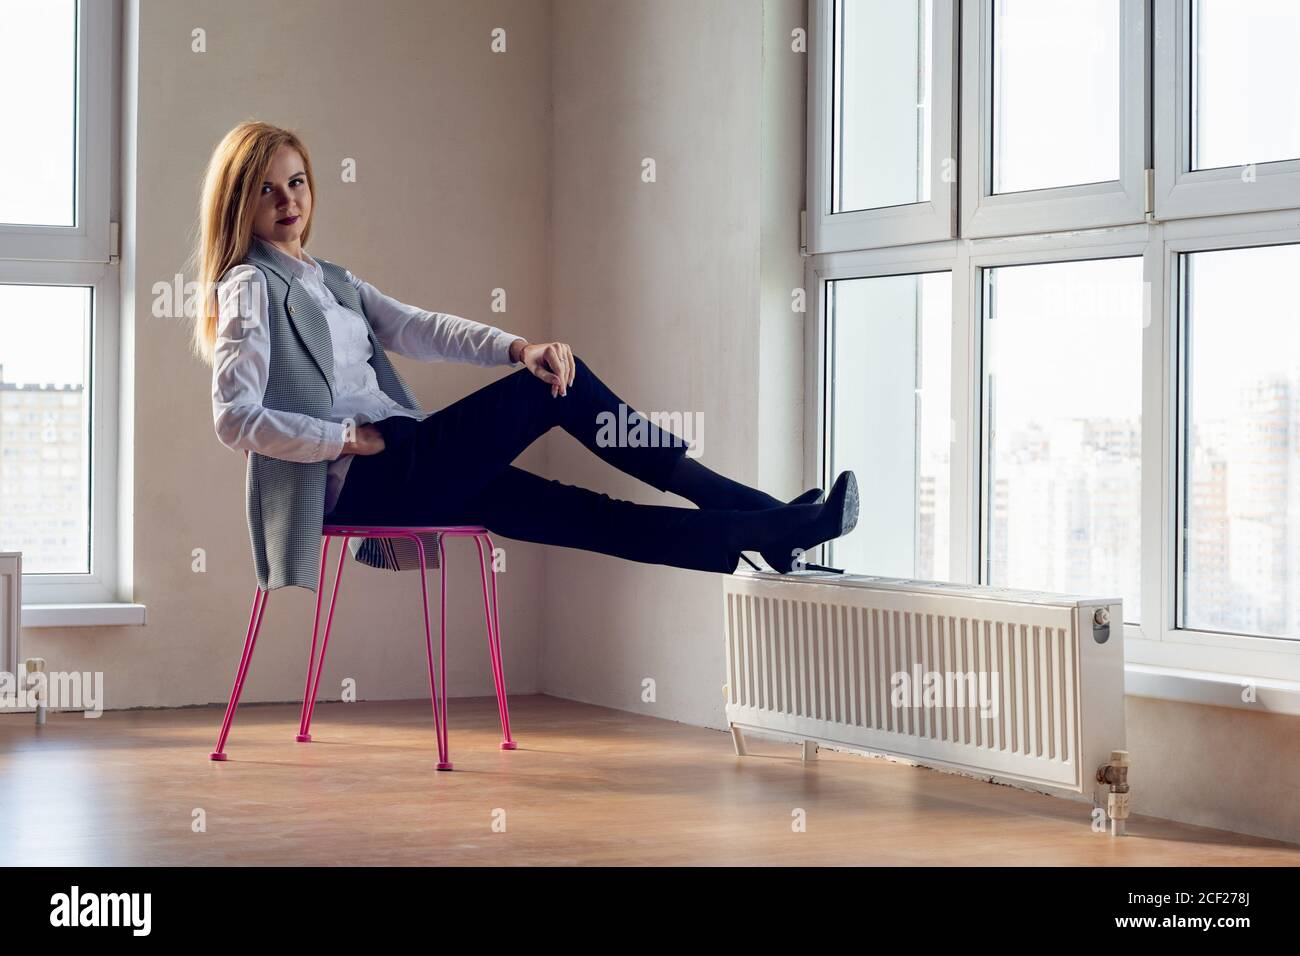 elegant girl in uninhibited pose sits on a chair in a large empty room. Stock Photo